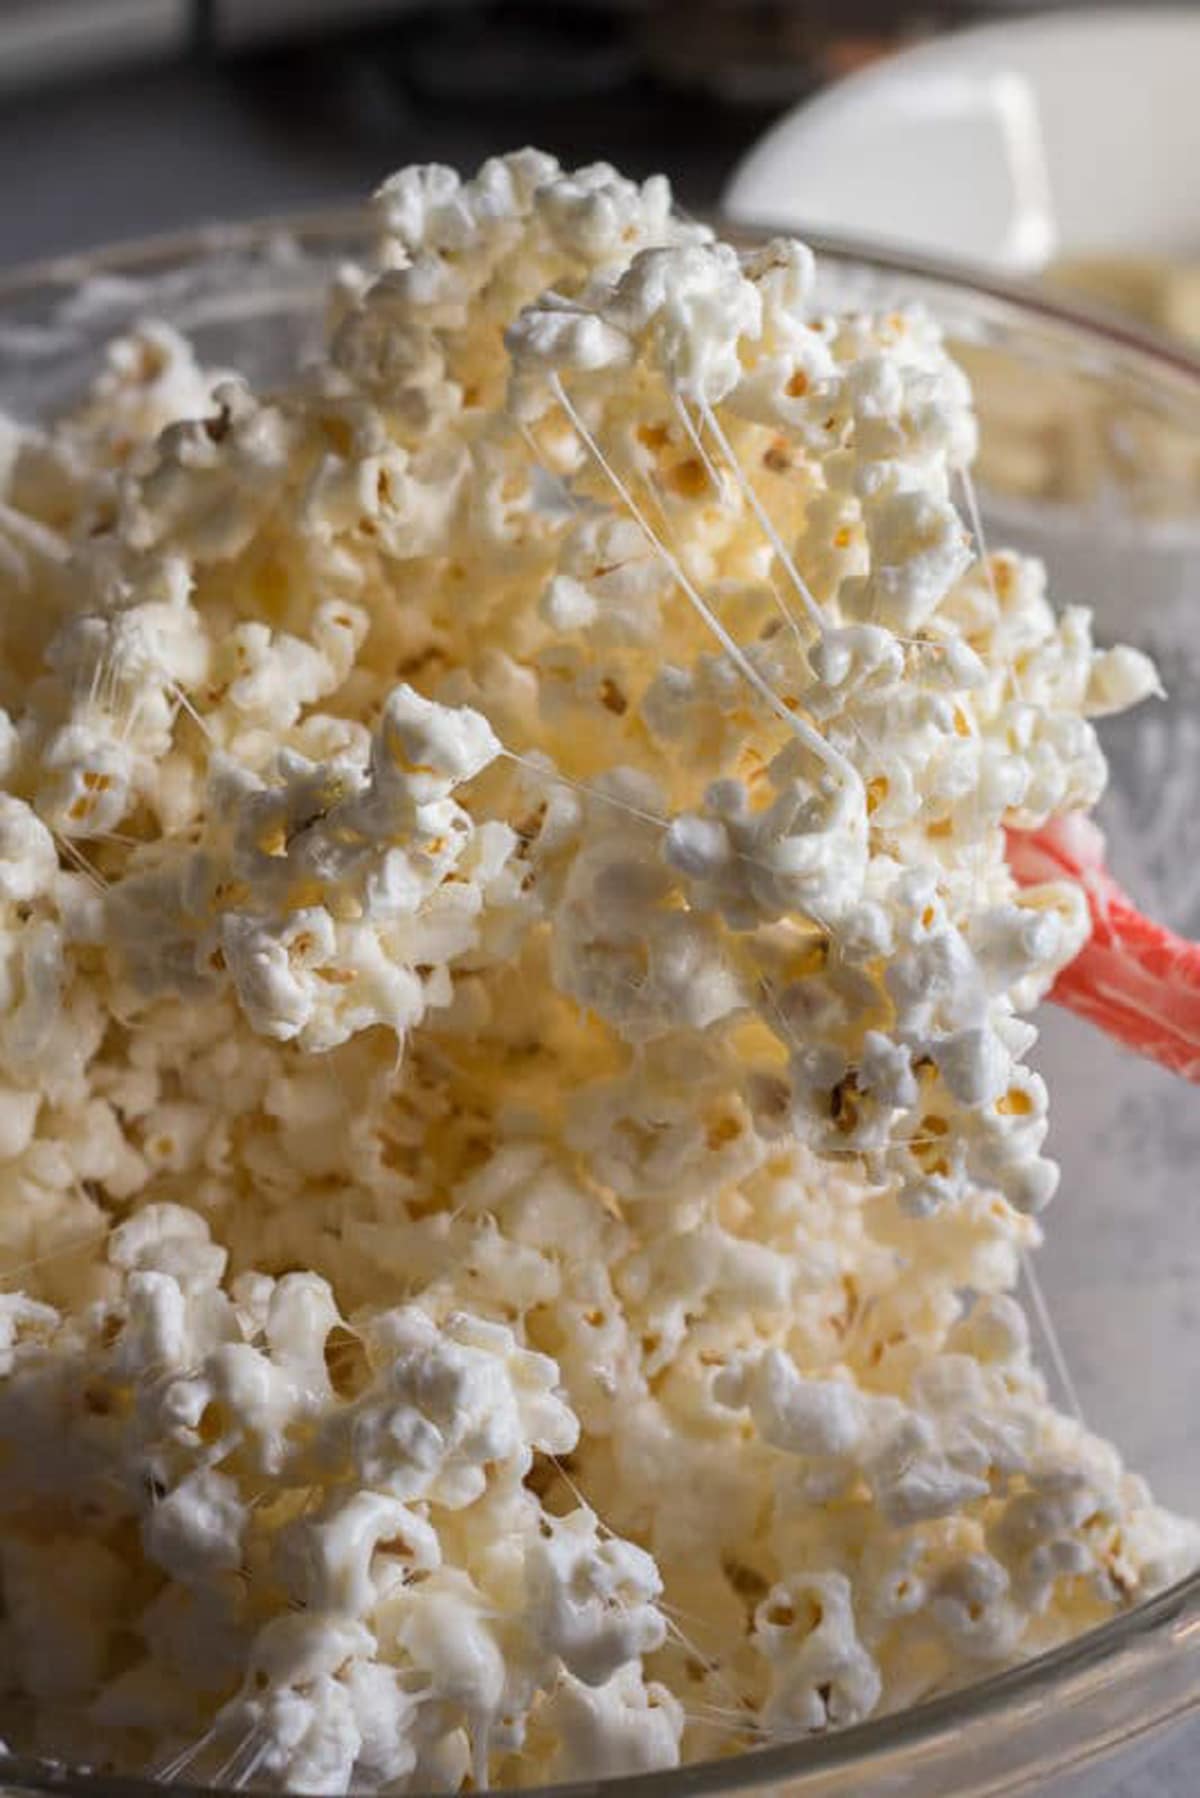 Melted marshmallows being stirred into popcorn with a red spatula.